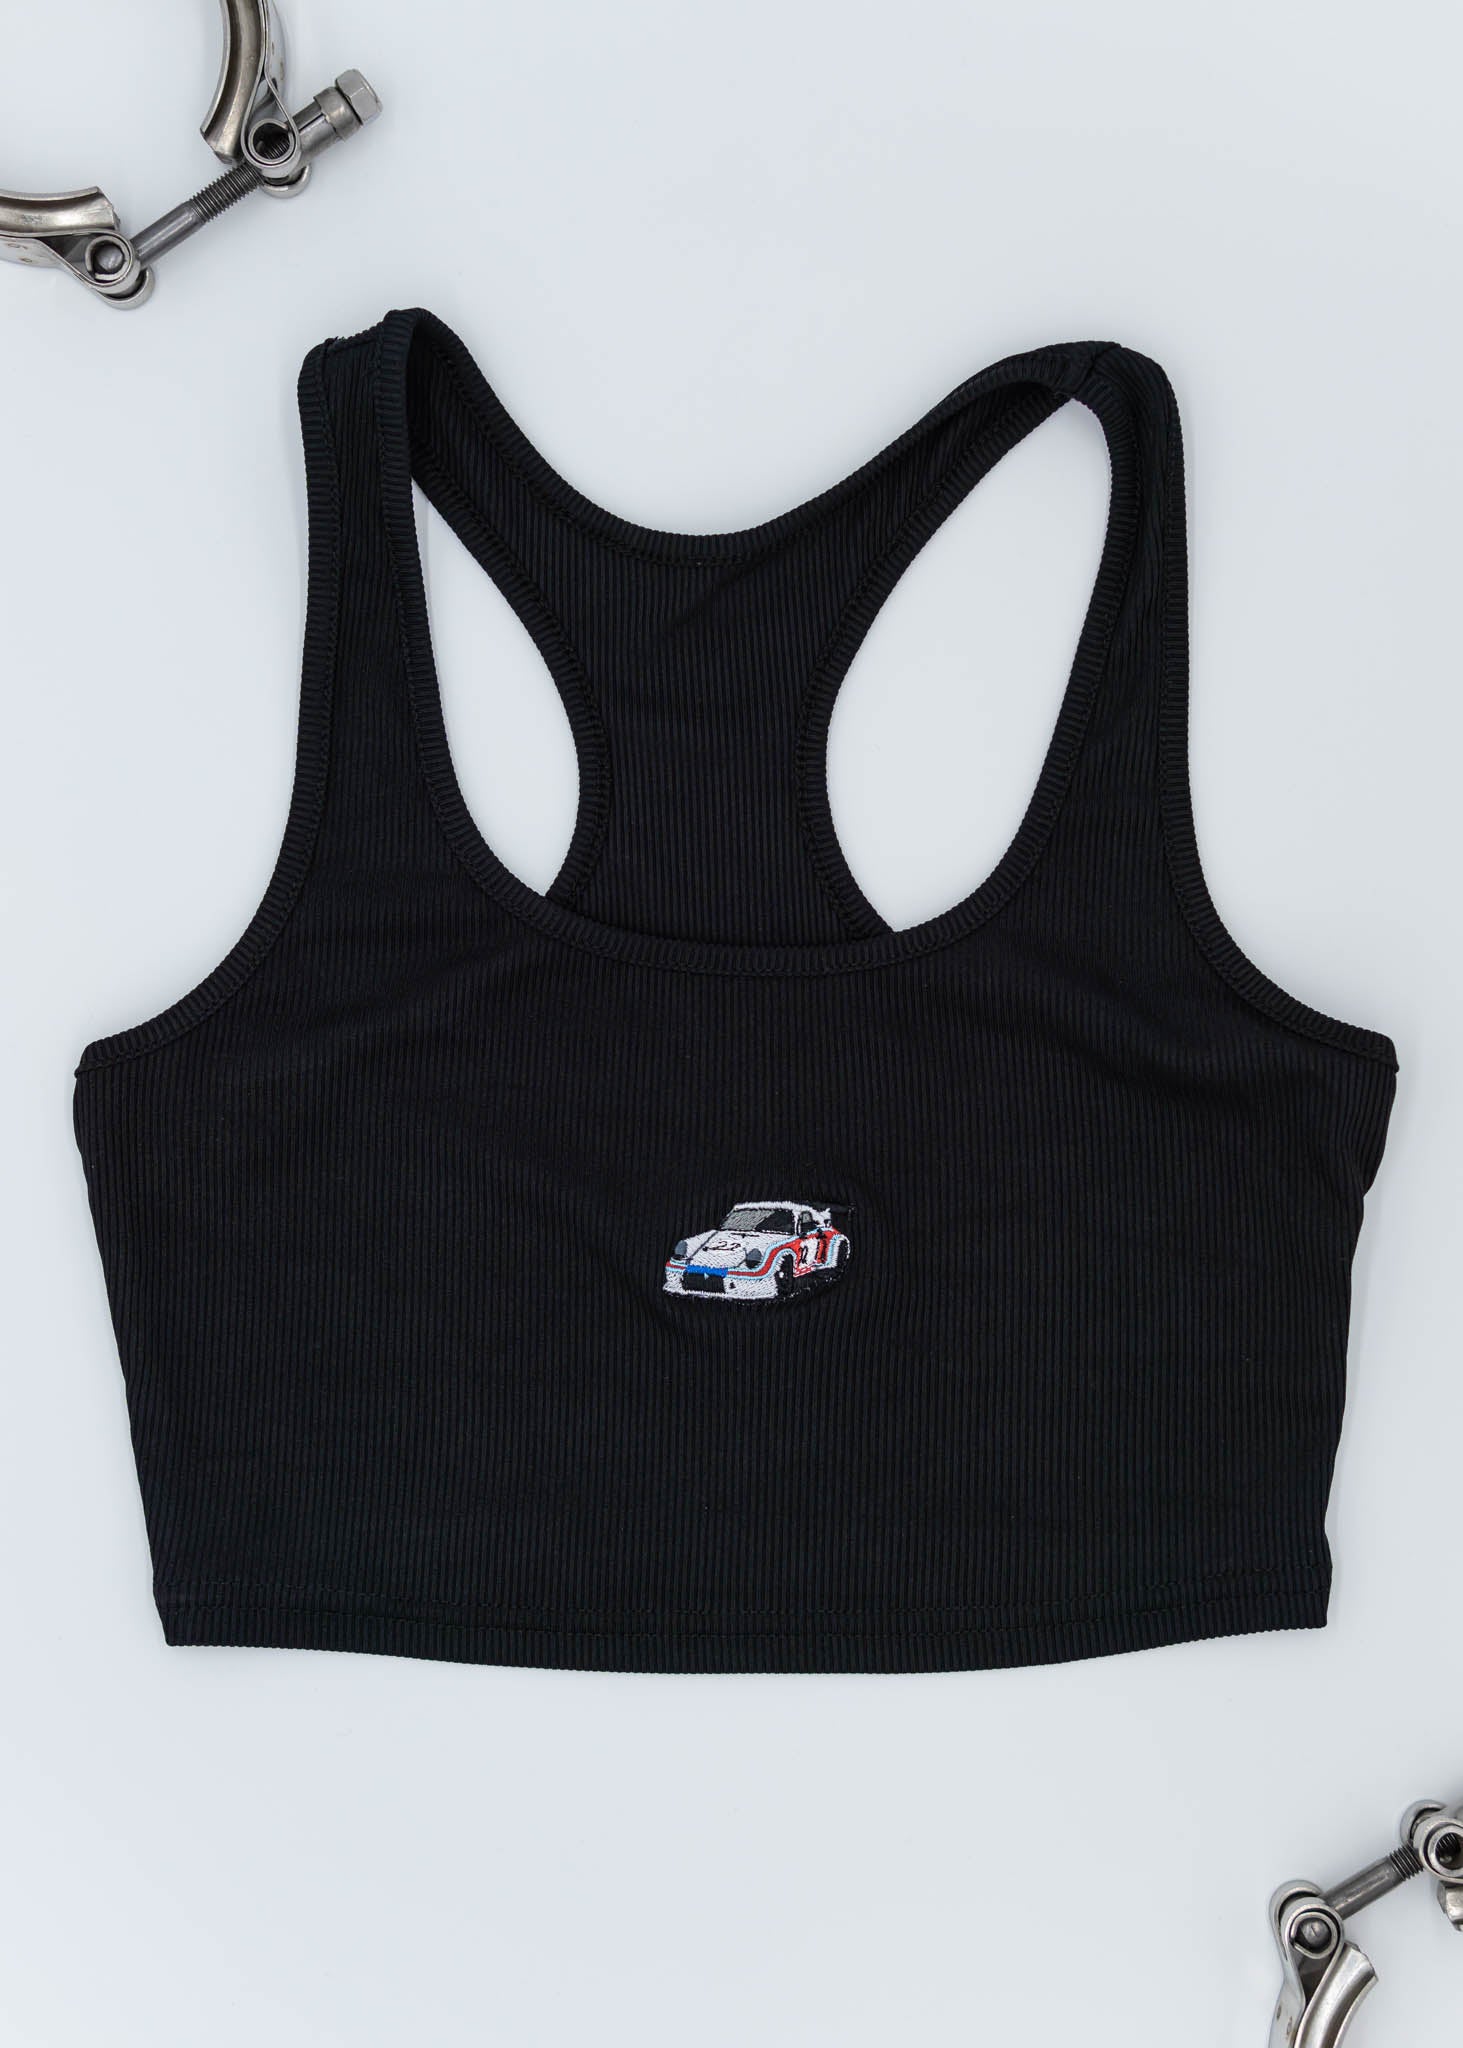 A black Porsche crop top for women. Photo is the front of the top with an embroidered Martini R13 Porsche 911 Carrera RSR 2.1 Turbo. Fabric composition is polyester, and cotton. The material is stretchy, ribbed, and non-transparent. The style of this shirt is sleeveless, with a scoop neckline.